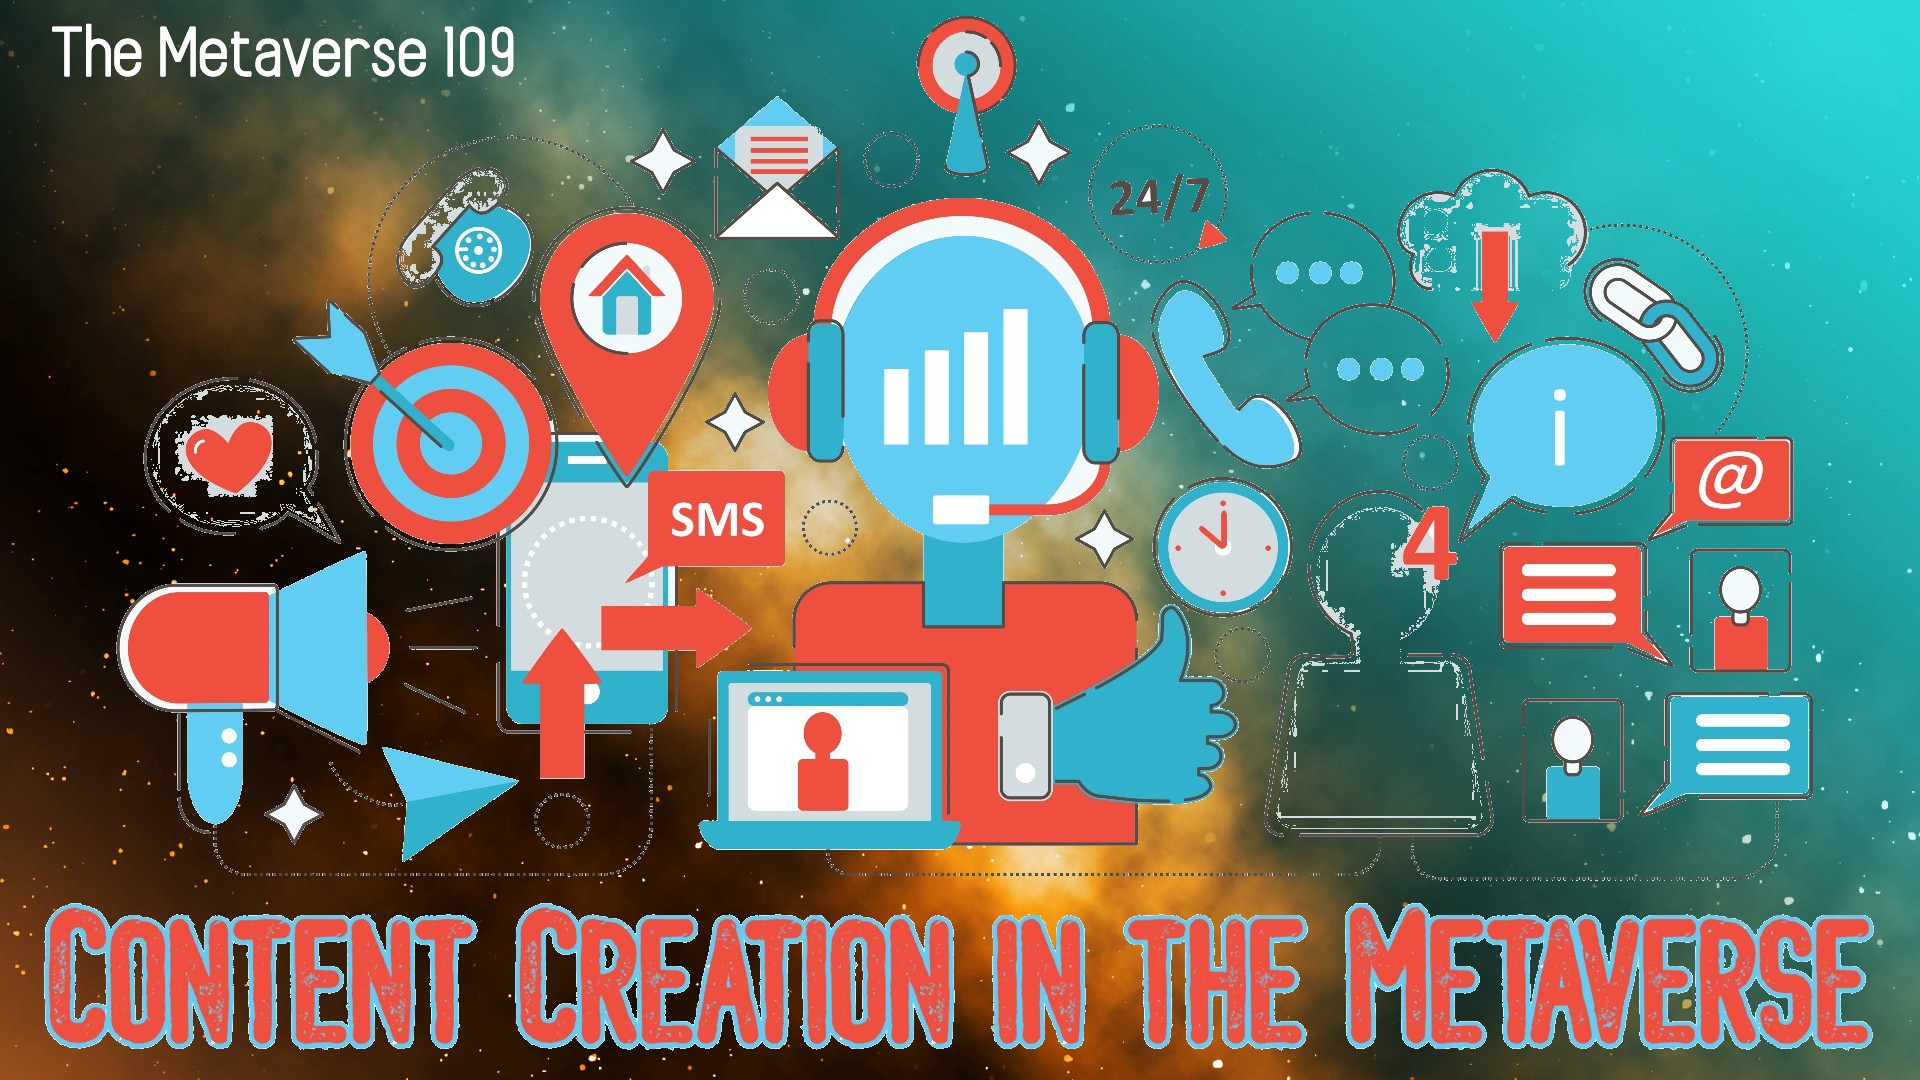 The Metaverse 109: Content Creation in the Metaverse